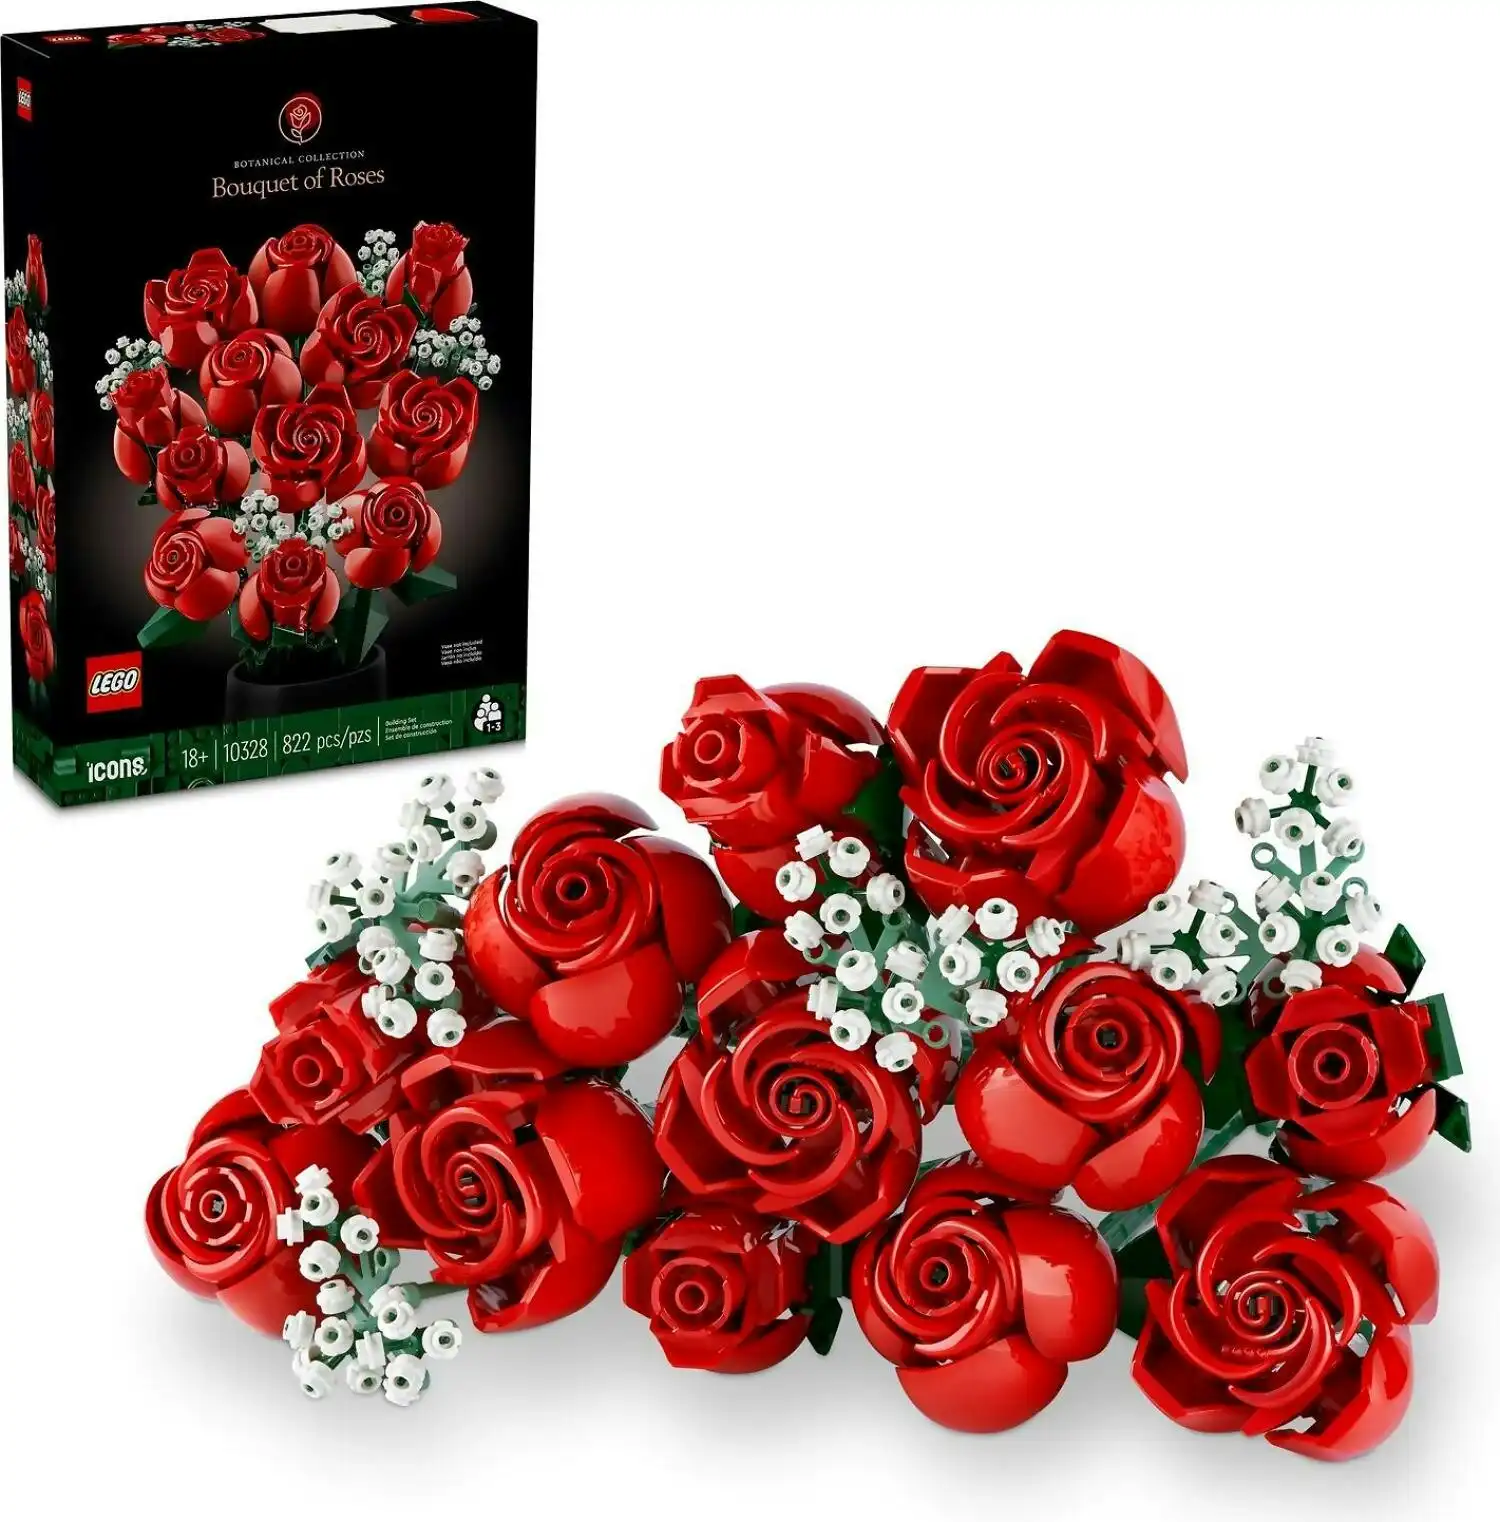 LEGO 10328 Bouquet of Roses - Icons